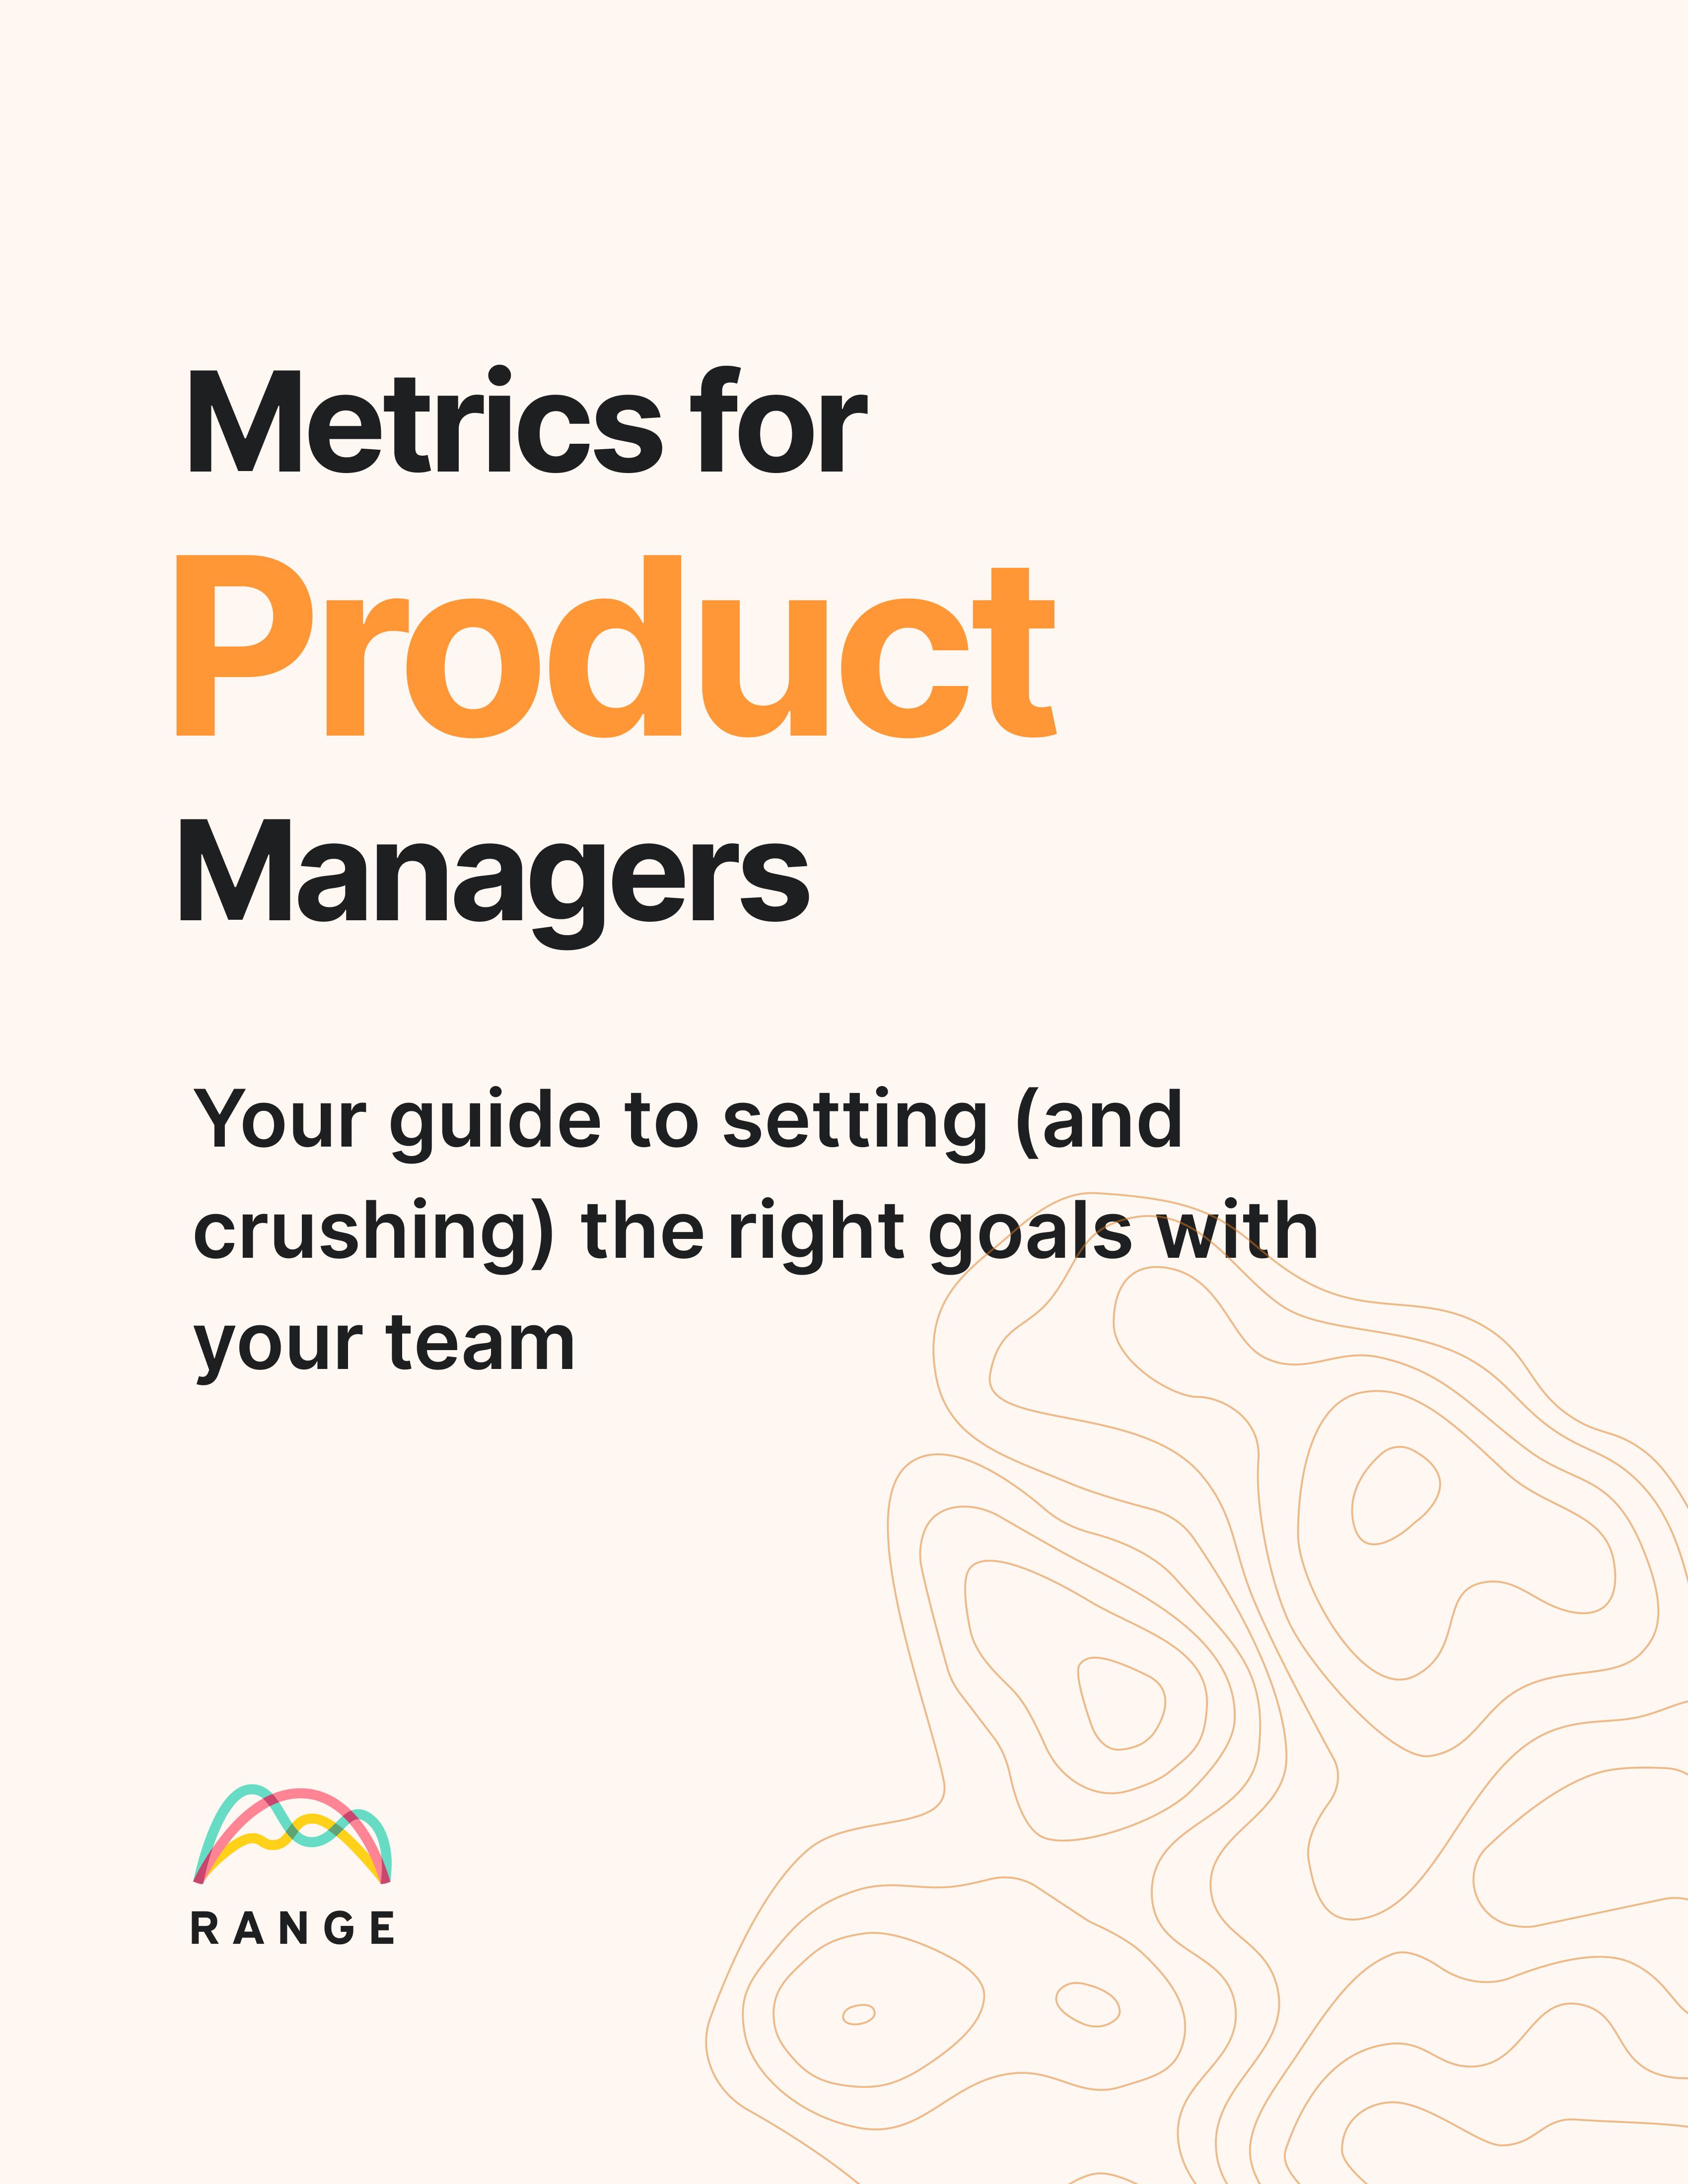 Metrics for Product Managers